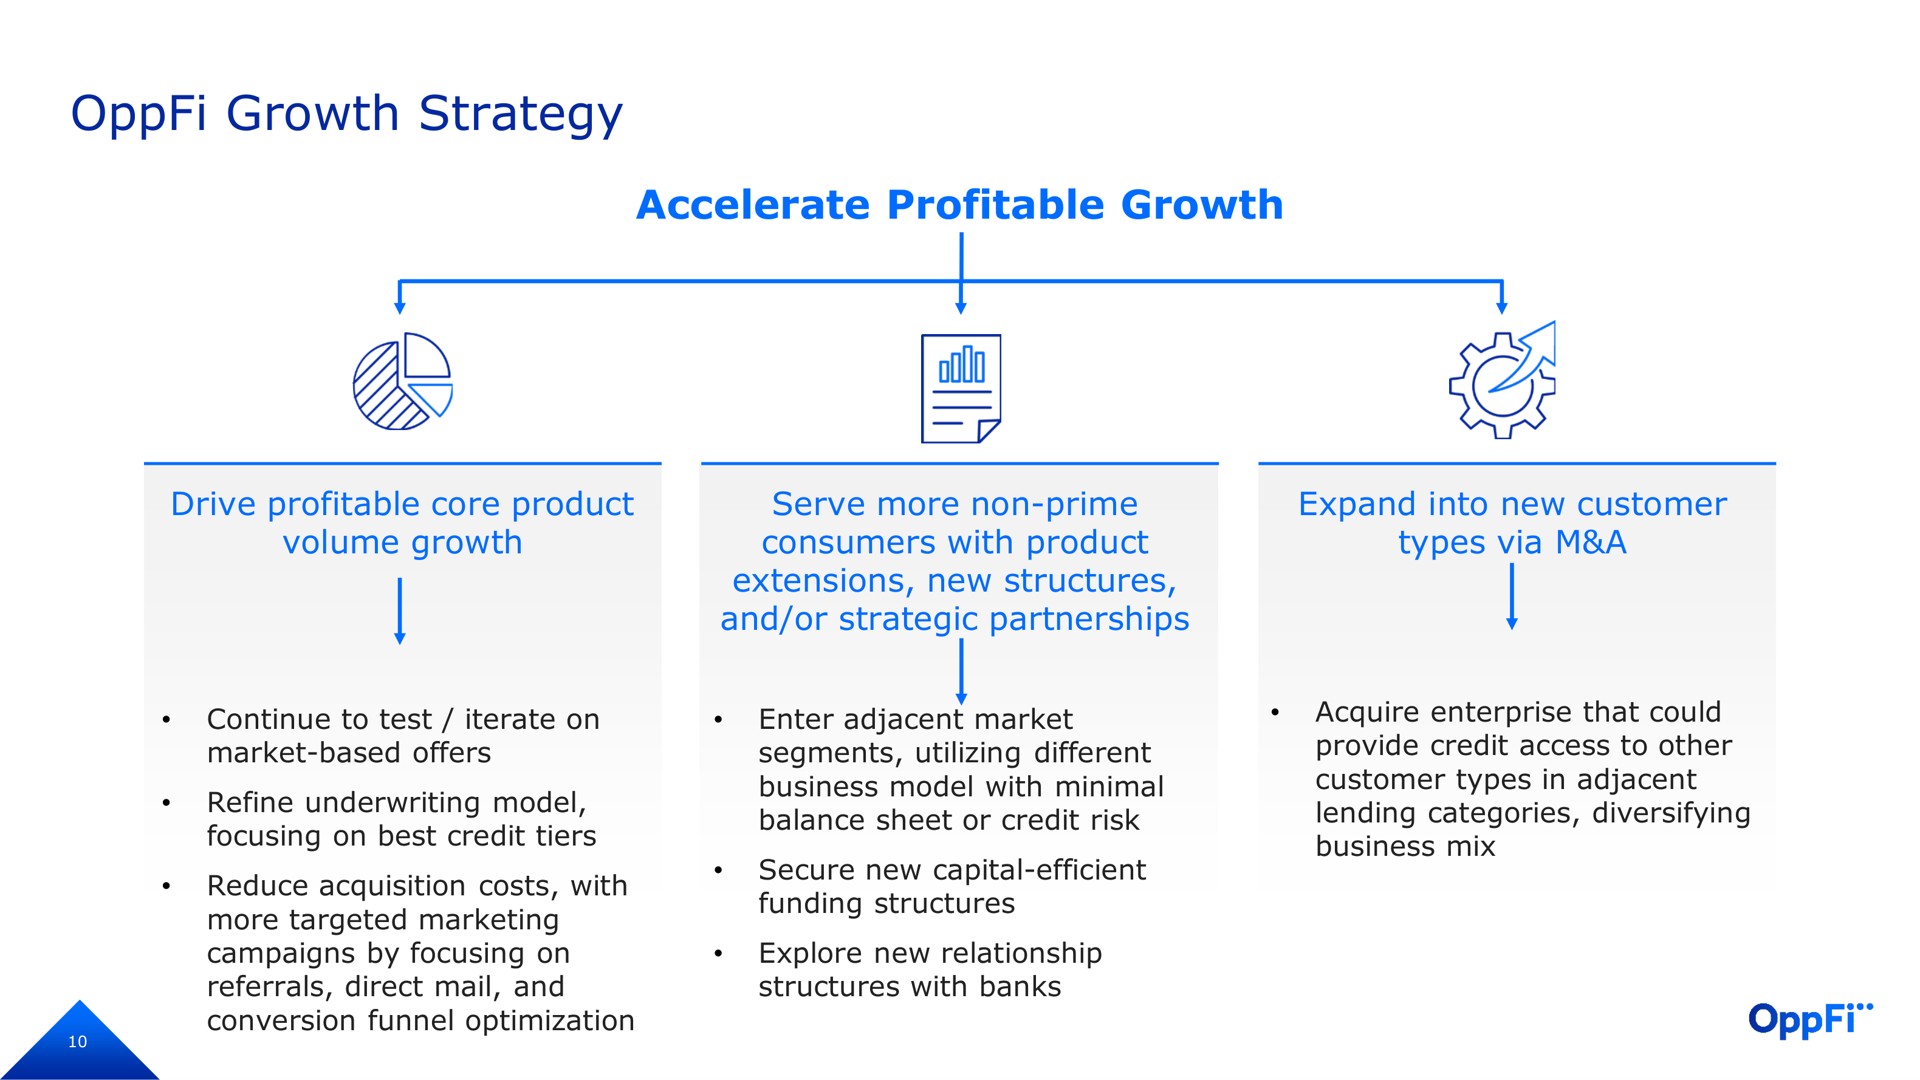 growth strategy accelerate profitable growth drive profitable core product volume growth serve more non prime consumers with product extensions new structures and or strategic partnerships expand into new customer types via a continue to test iterate on market based offers refine underwriting model focusing on best credit tiers reduce acquisition costs with more targeted marketing campaigns by focusing on referrals direct mail and conversion funnel optimization enter adjacent market segments utilizing different business model with minimal balance sheet or credit risk secure new capital efficient funding structures explore new relationship structures with banks acquire enterprise that could provide credit access to other customer types in adjacent lending categories diversifying business mix | OppFi